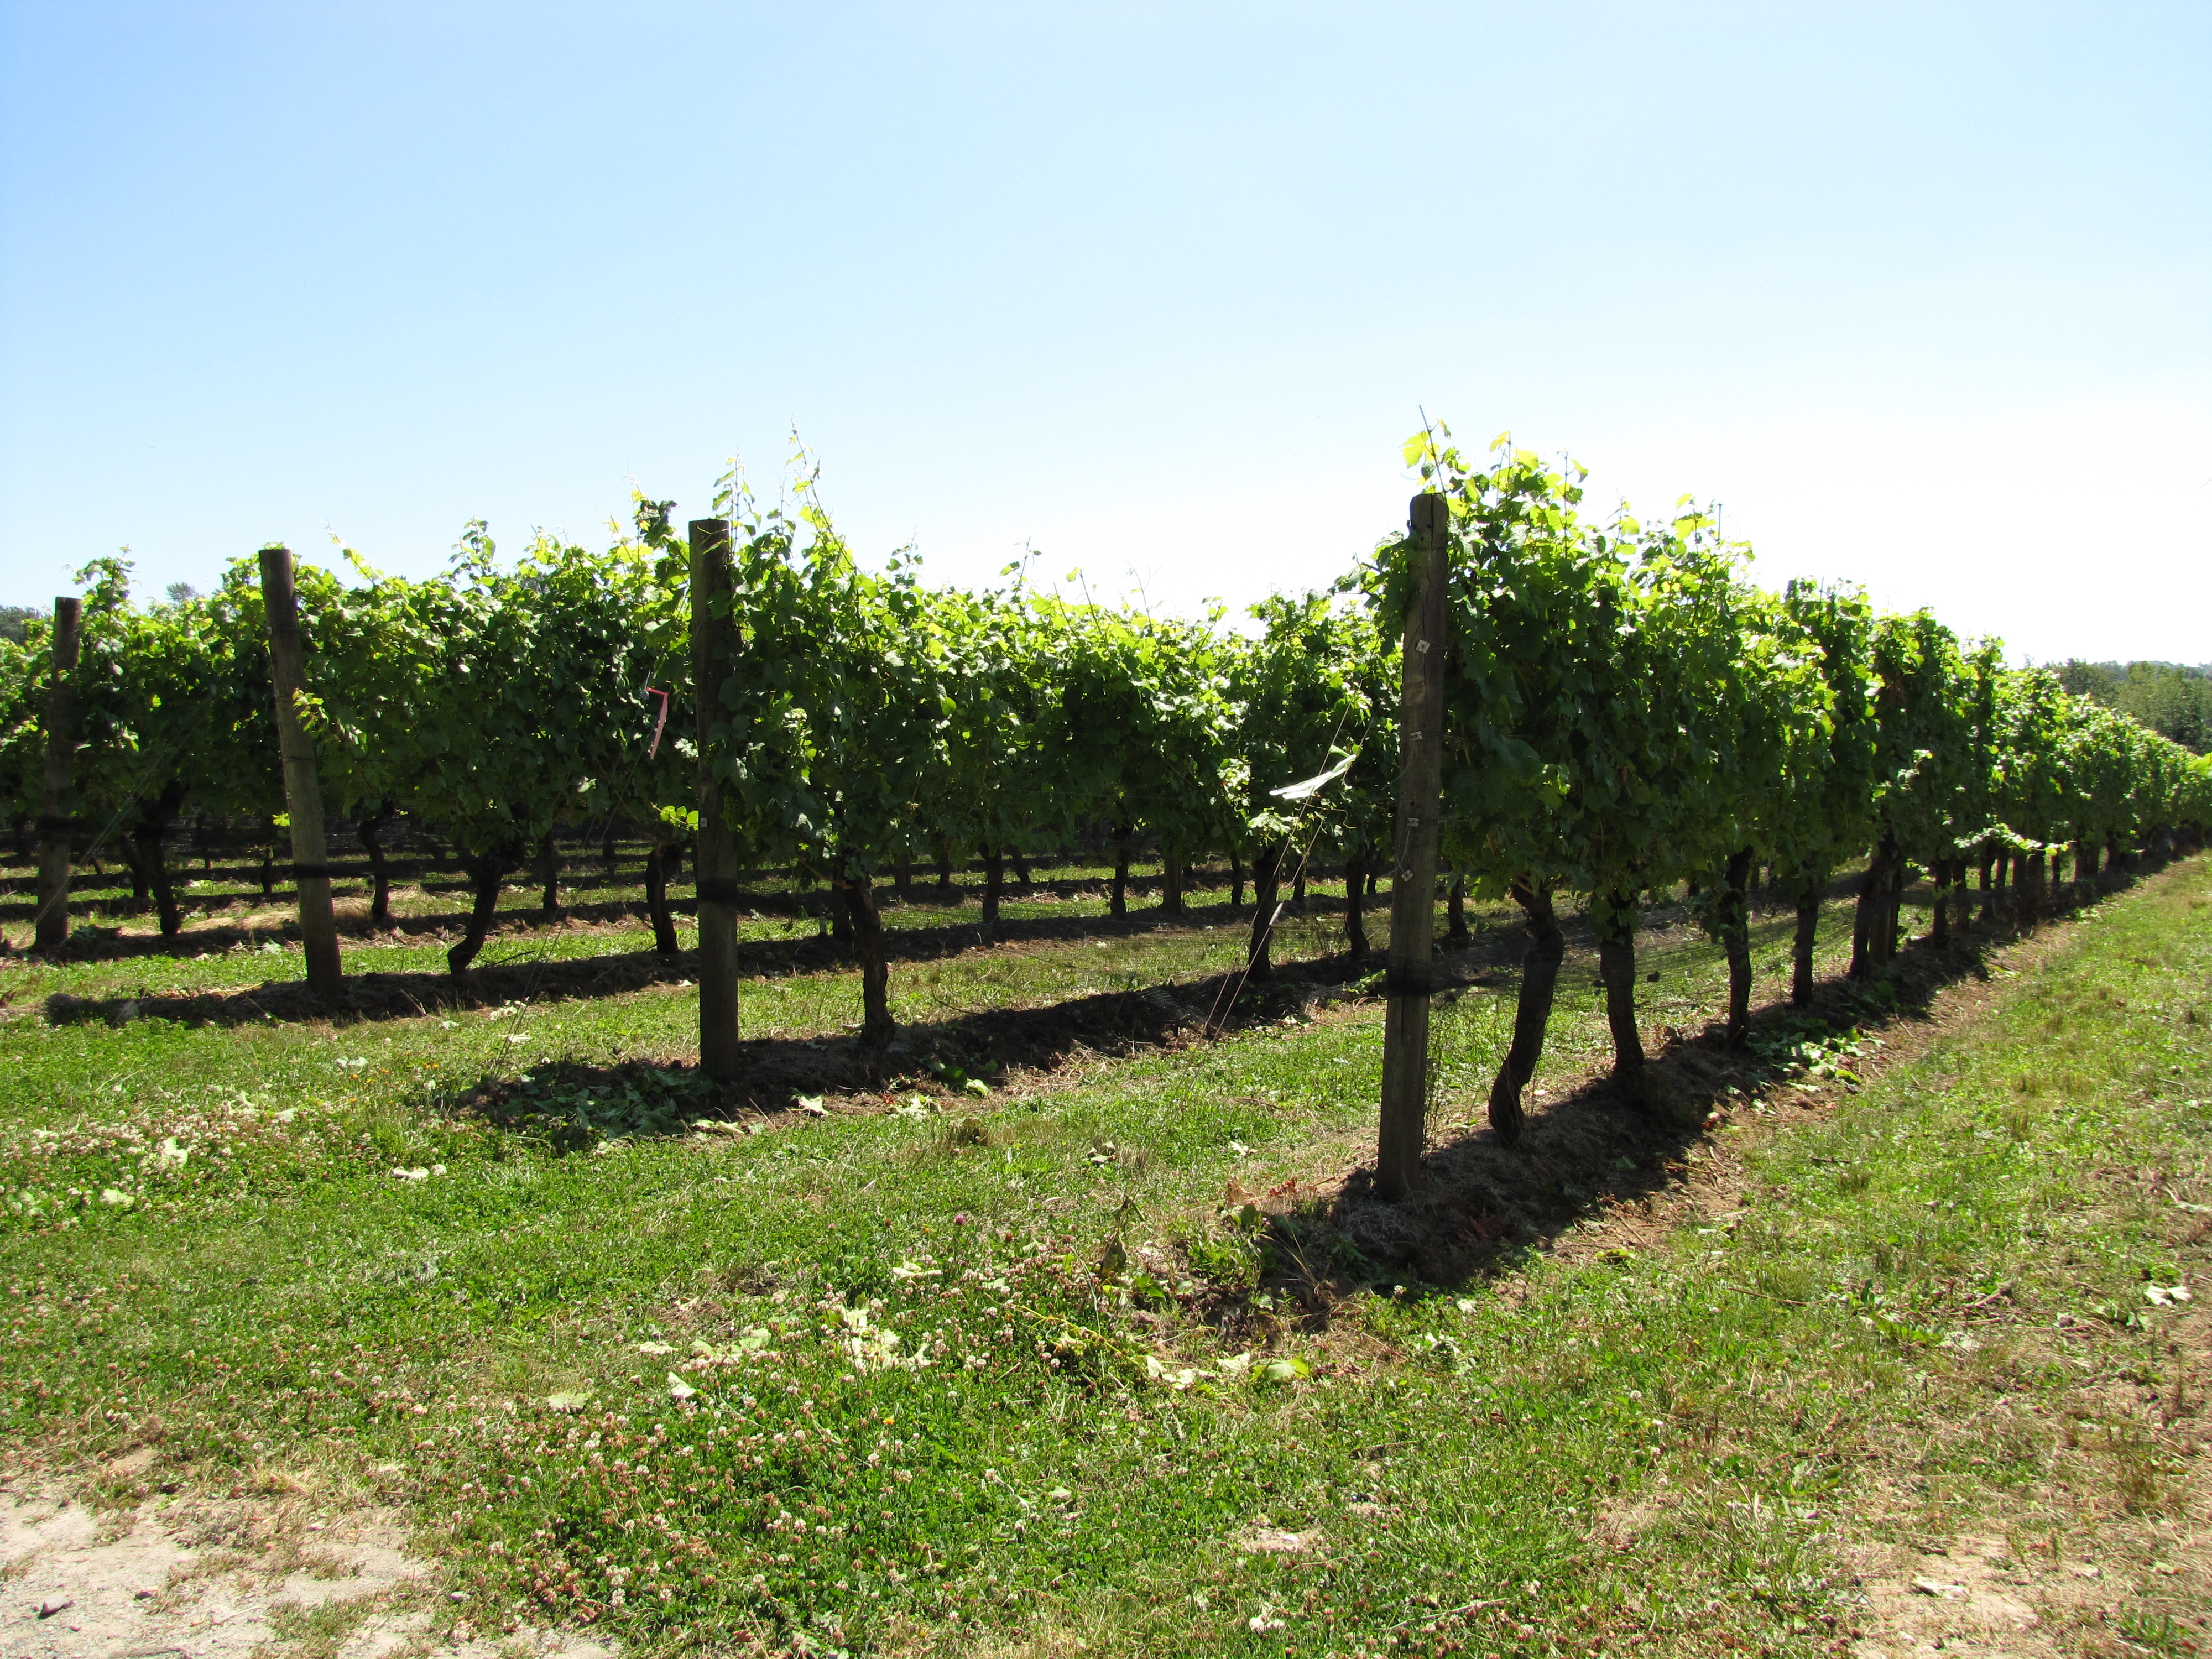  rows of fruit trees ready for harvesting for wine